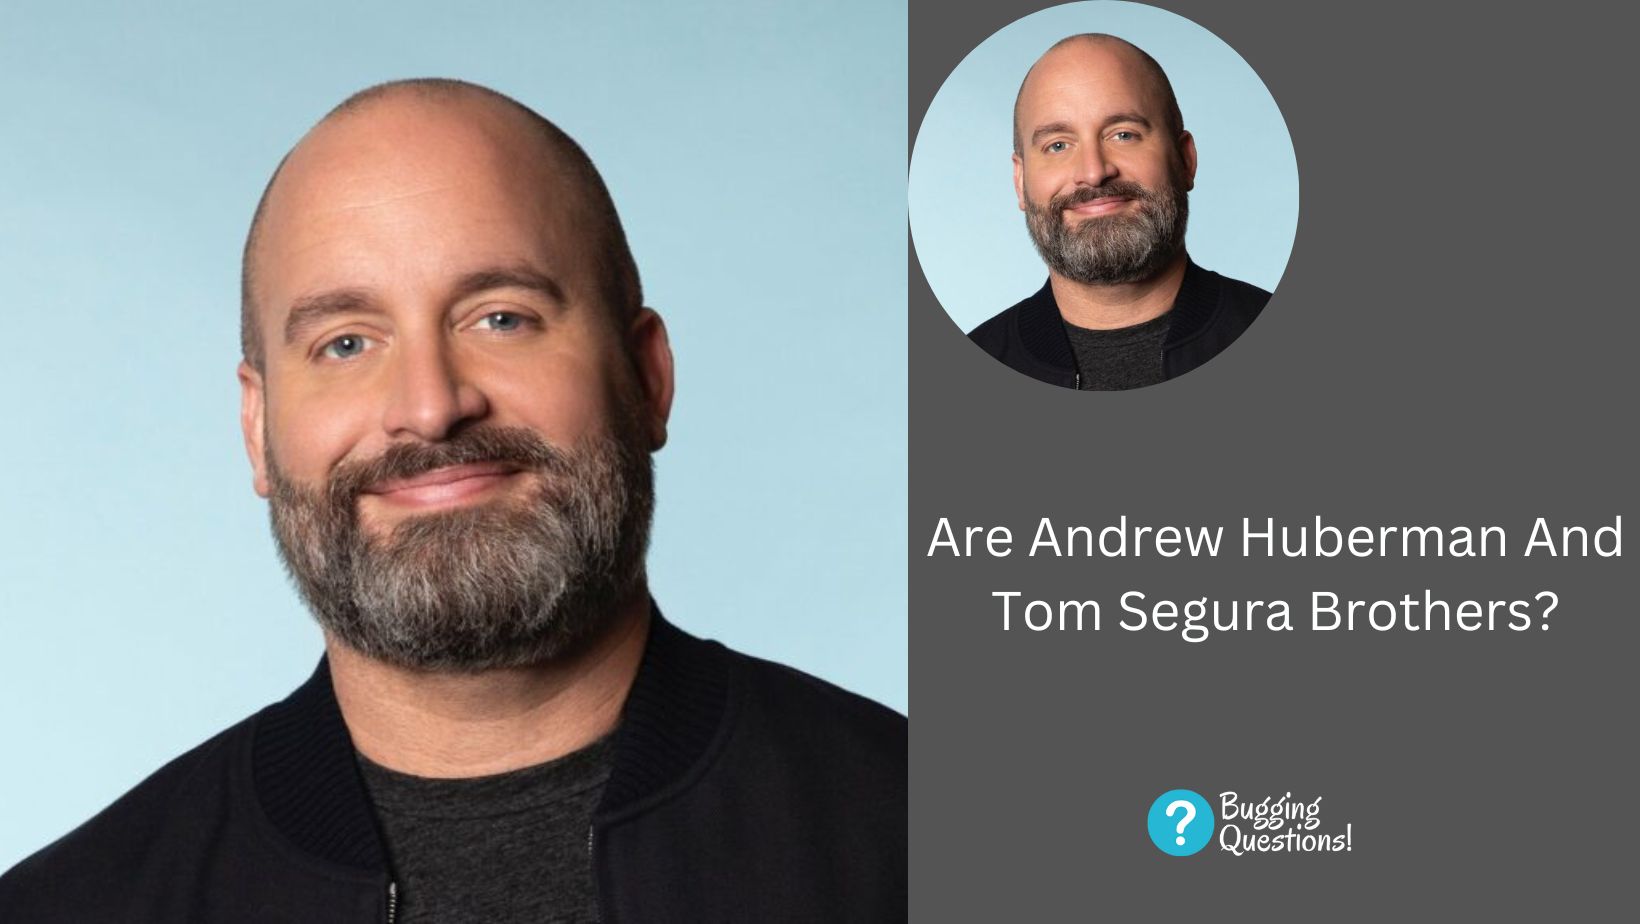 Are Andrew Huberman And Tom Segura Brothers?